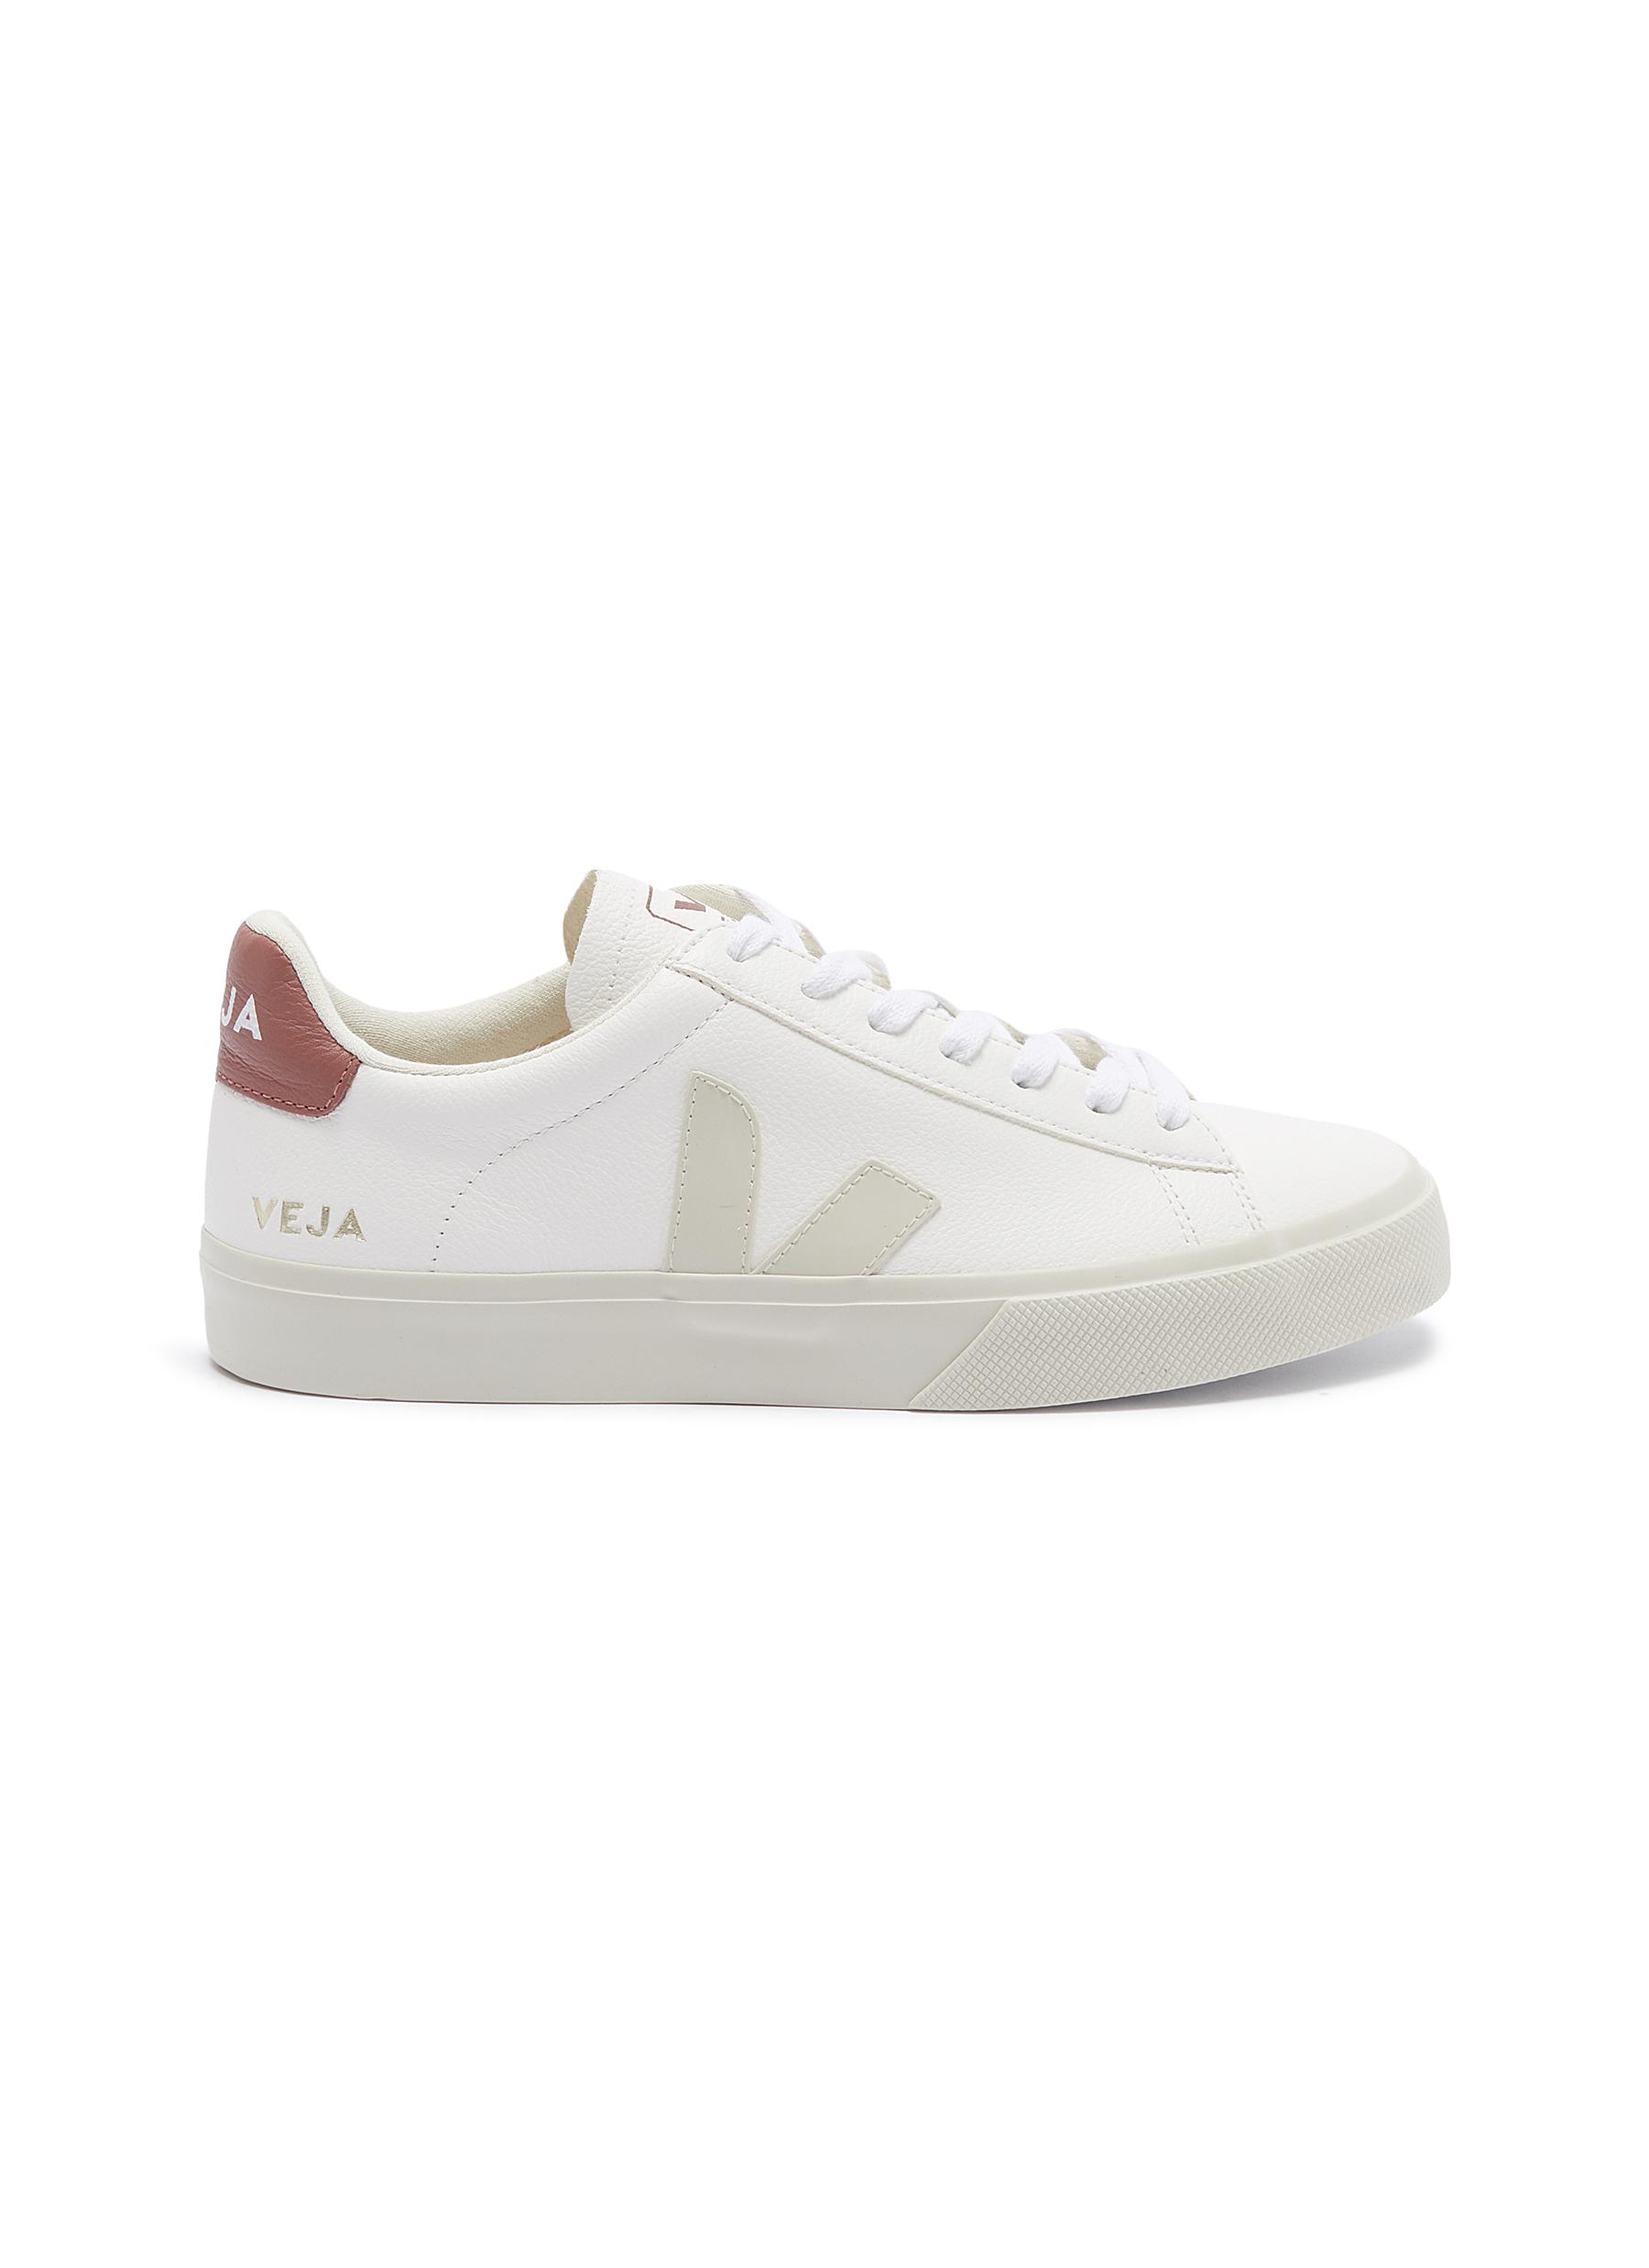 Veja Vegan Leather Contract Counter Sneakers